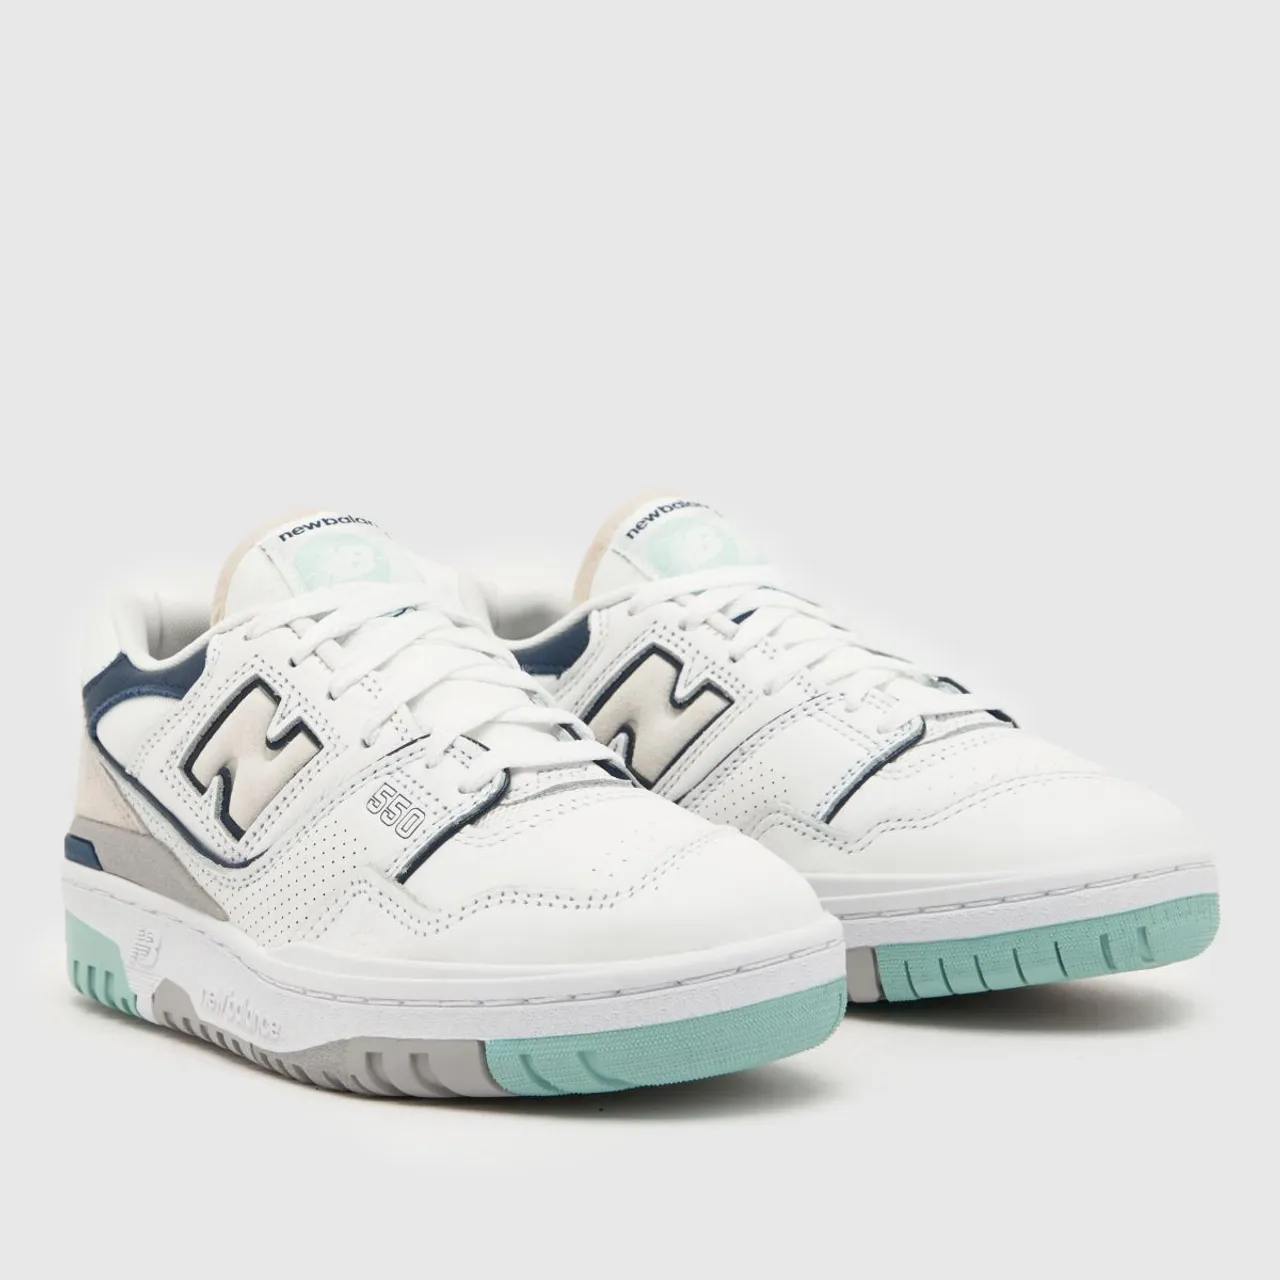 New Balance 550 Trainers In White & Blue